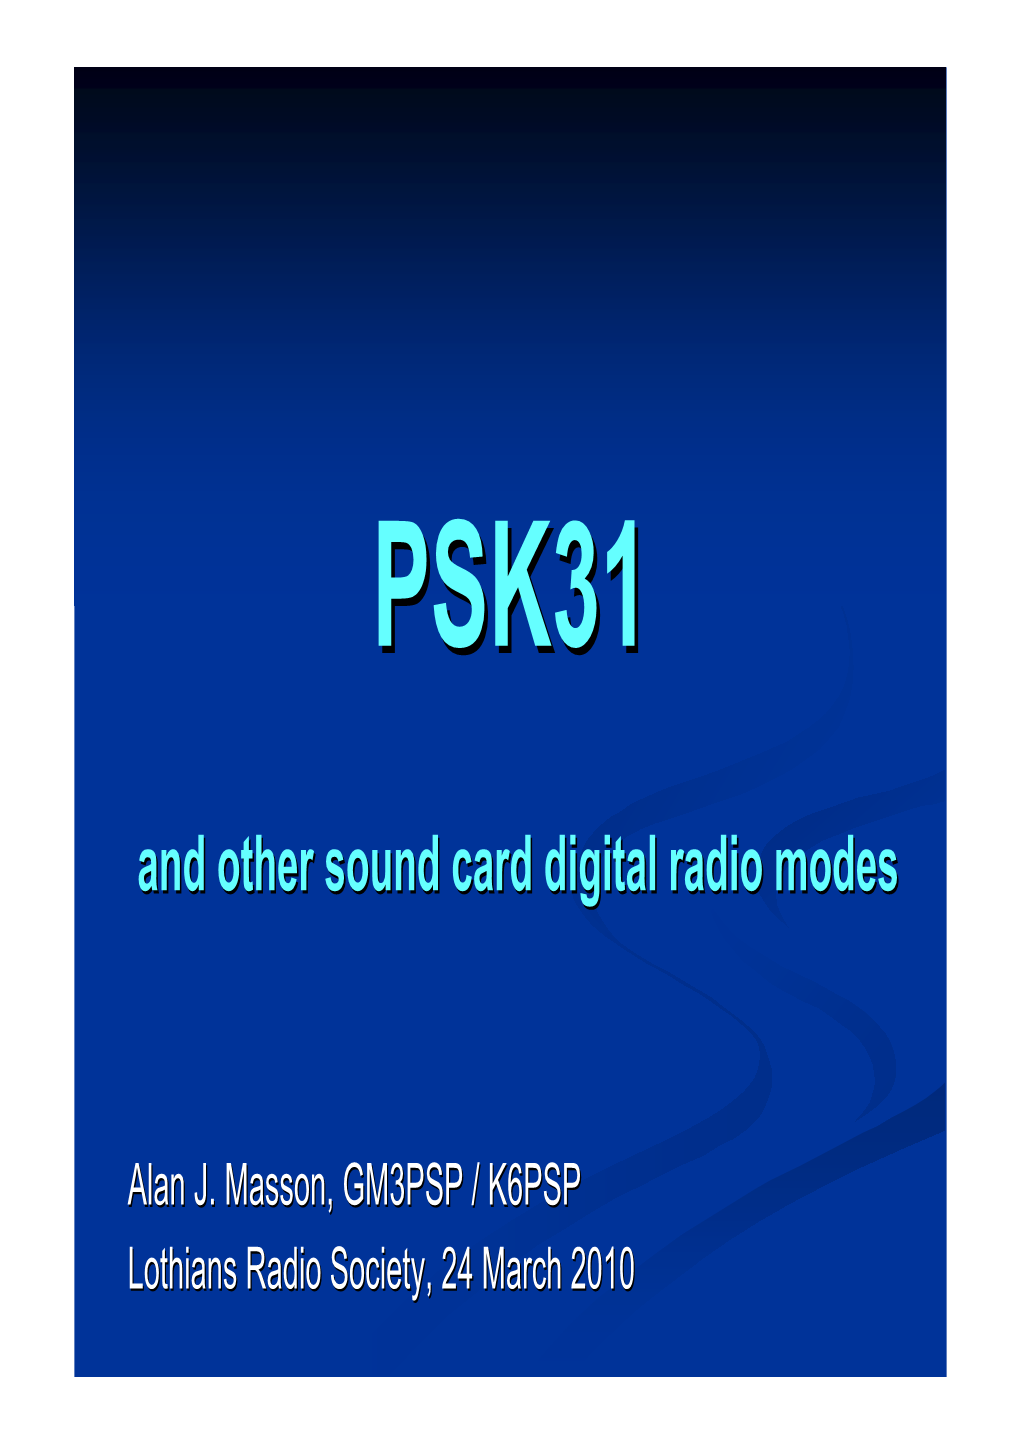 PSK31 Lecture 2010-03-24 For